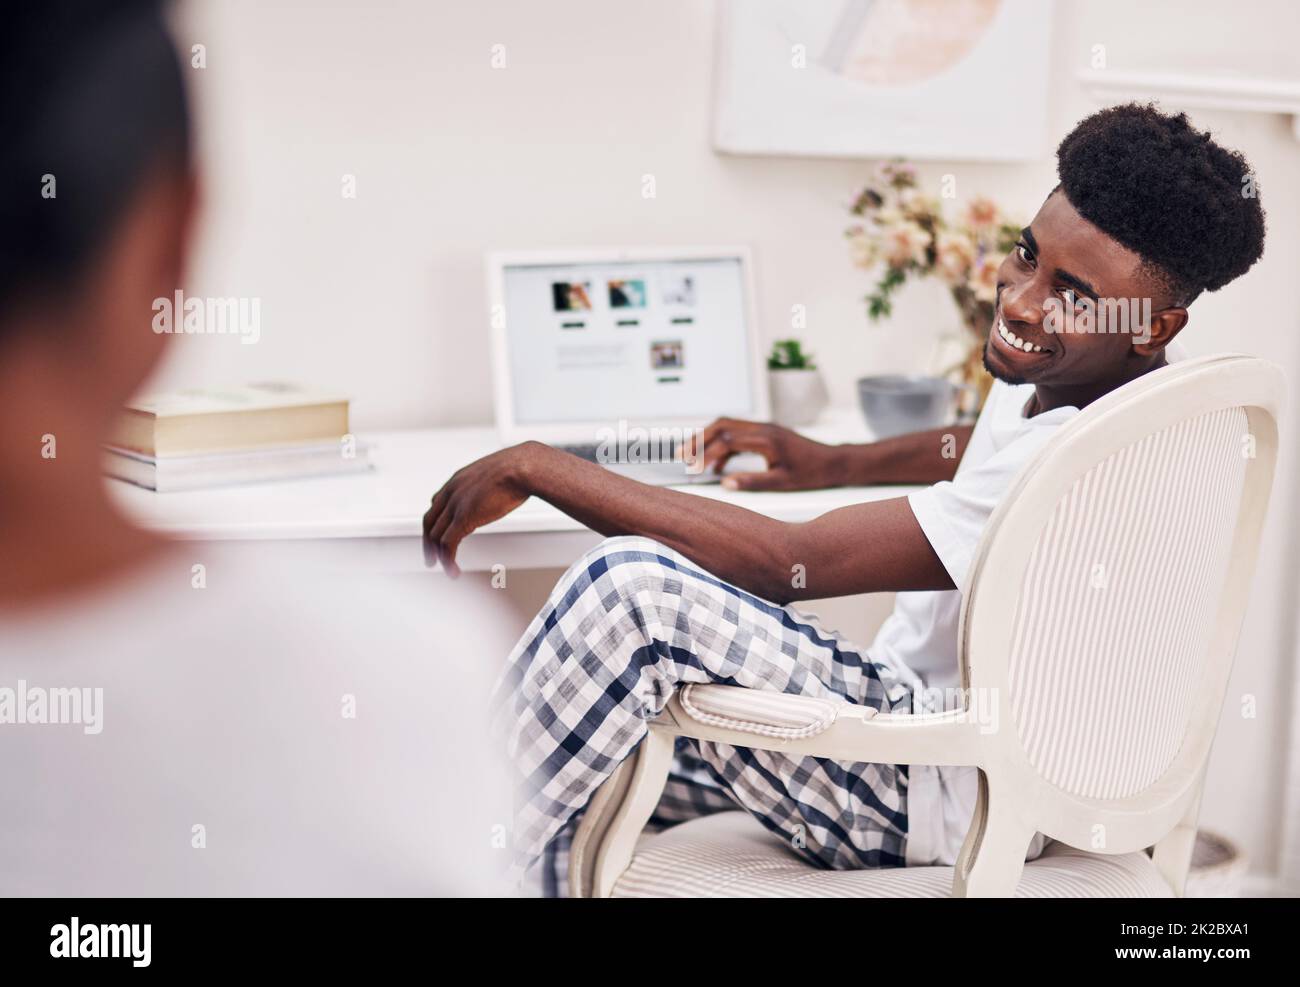 Hes up to no good online. Defocused shot of a young man using a laptop at home. Stock Photo